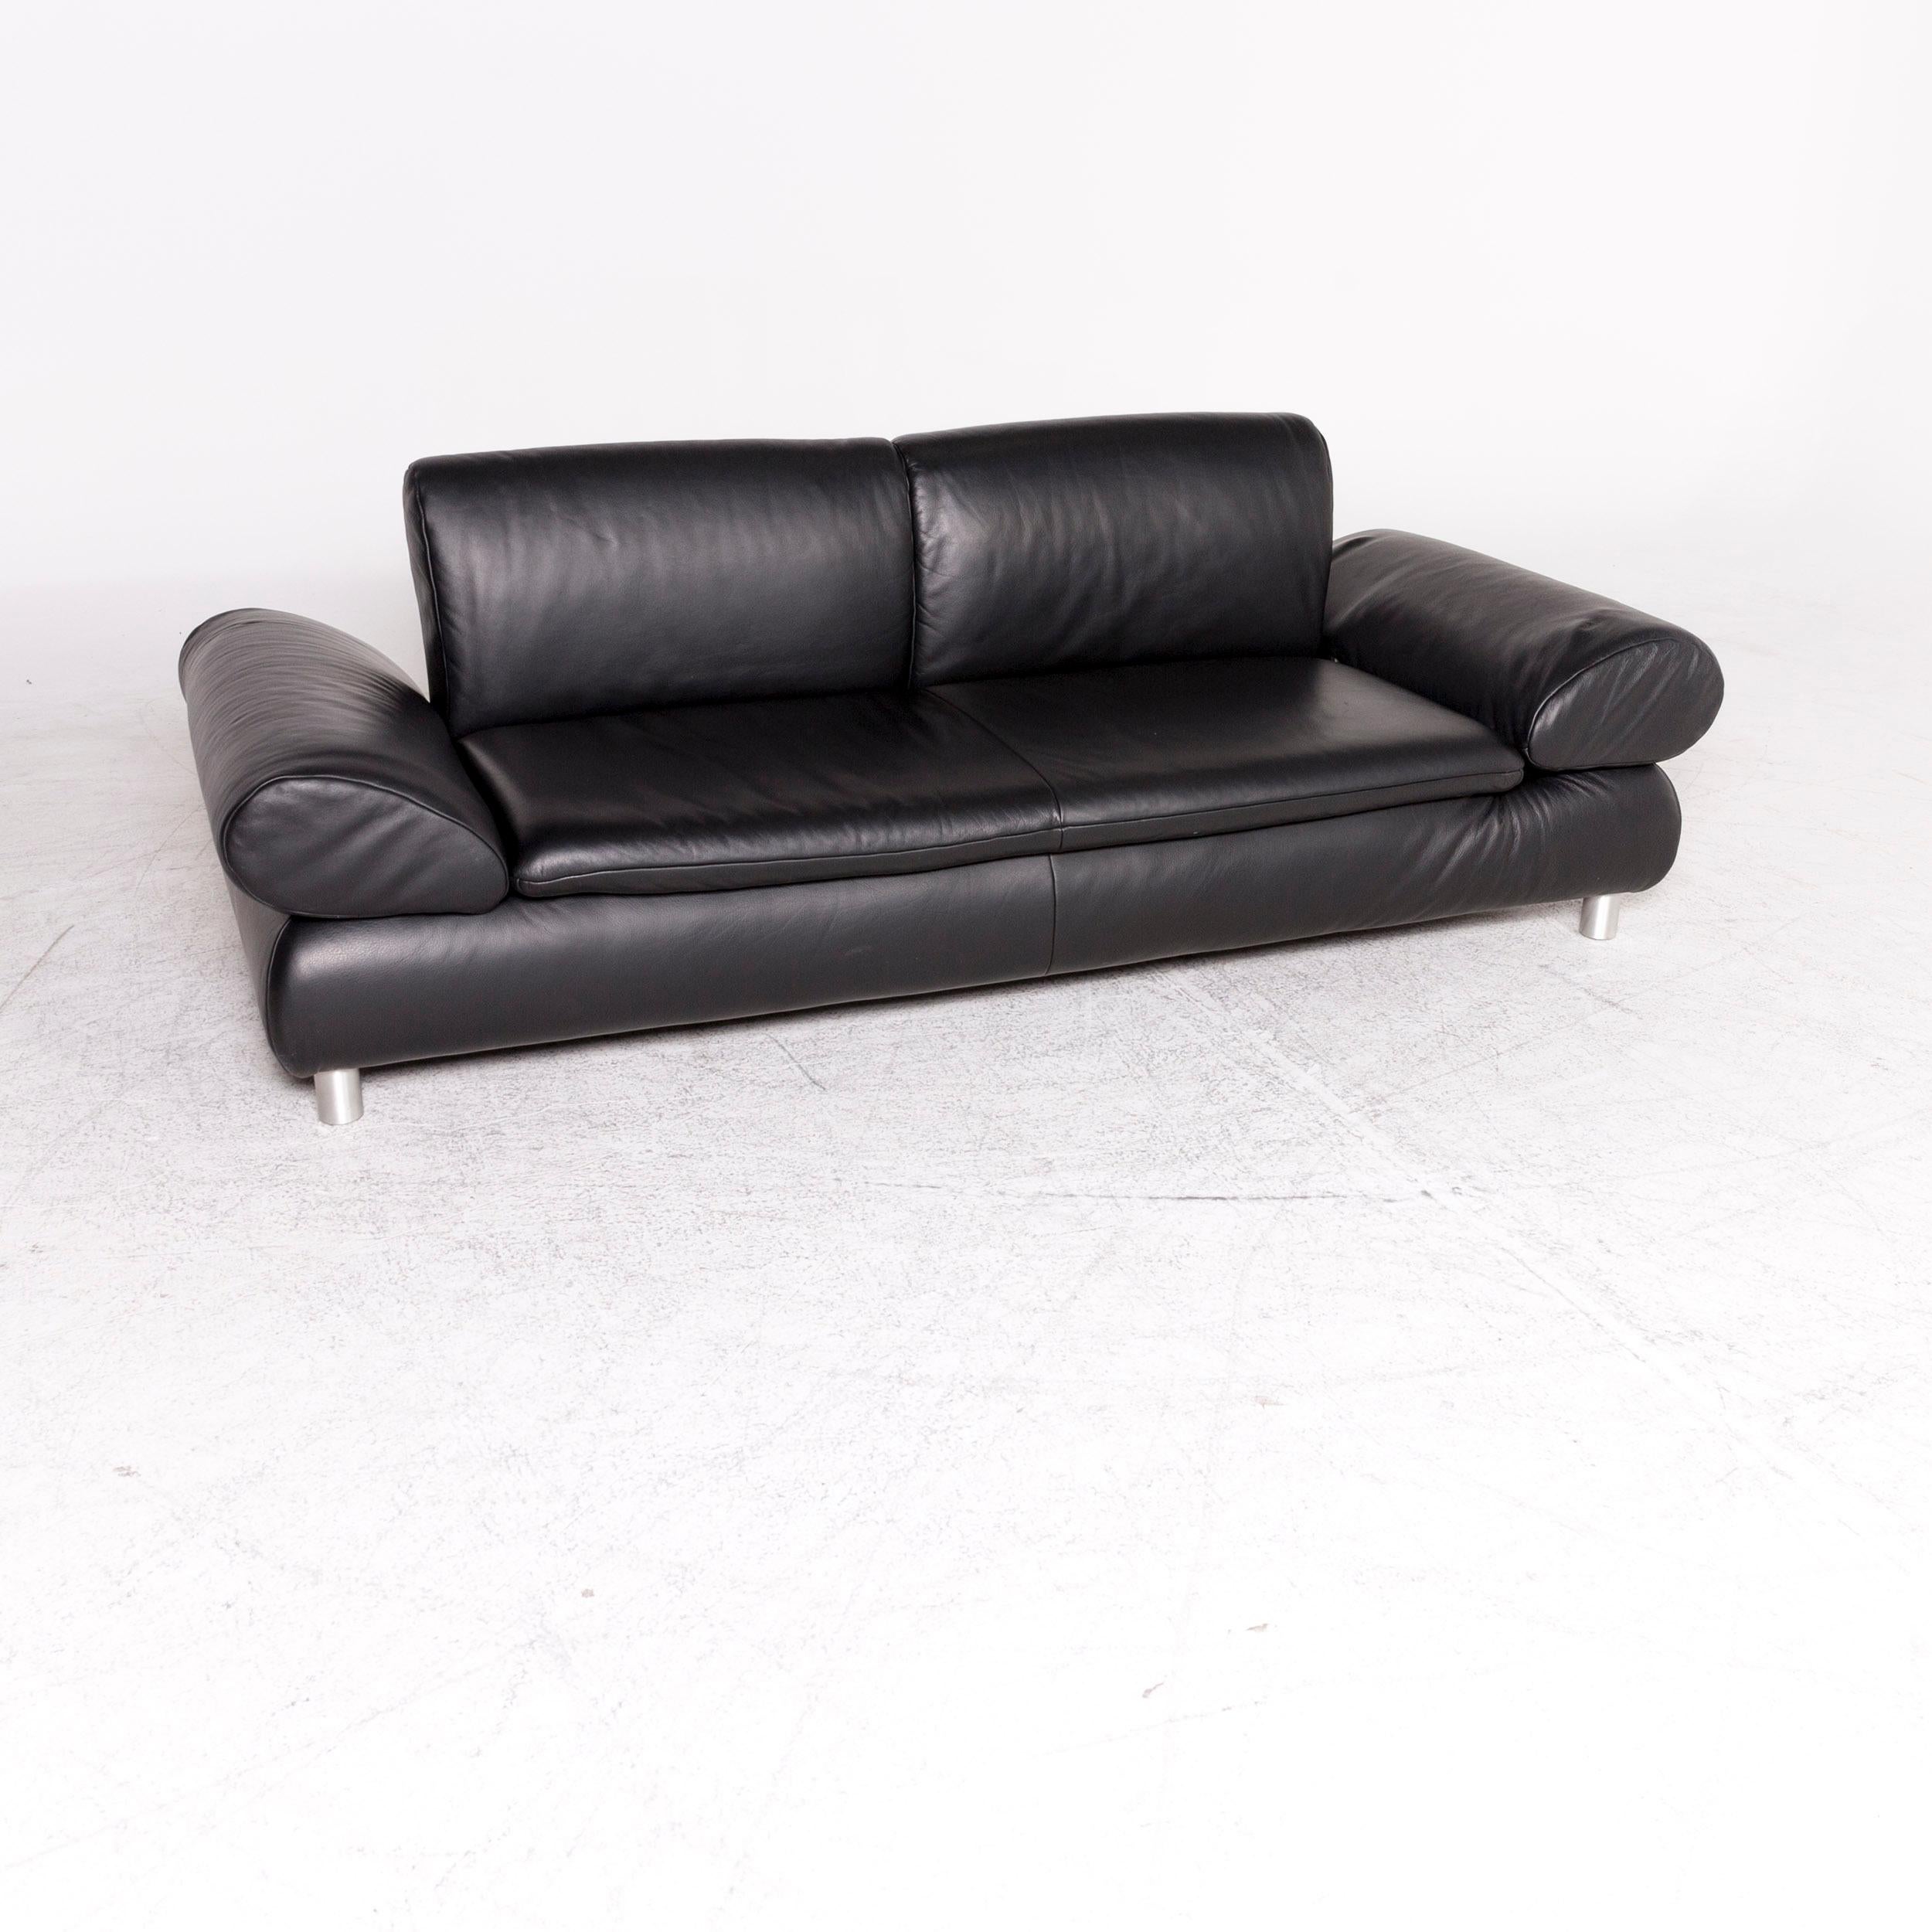 We bring to you a Koinor Donna designer leather sofa stool set black genuine leather two-seat.
 

Product measures in centimeters:

Depth: 97
Width: 218
Height: 79
Seat-height: 40
Rest-height: 52
Seat-depth: 60
Seat-width: